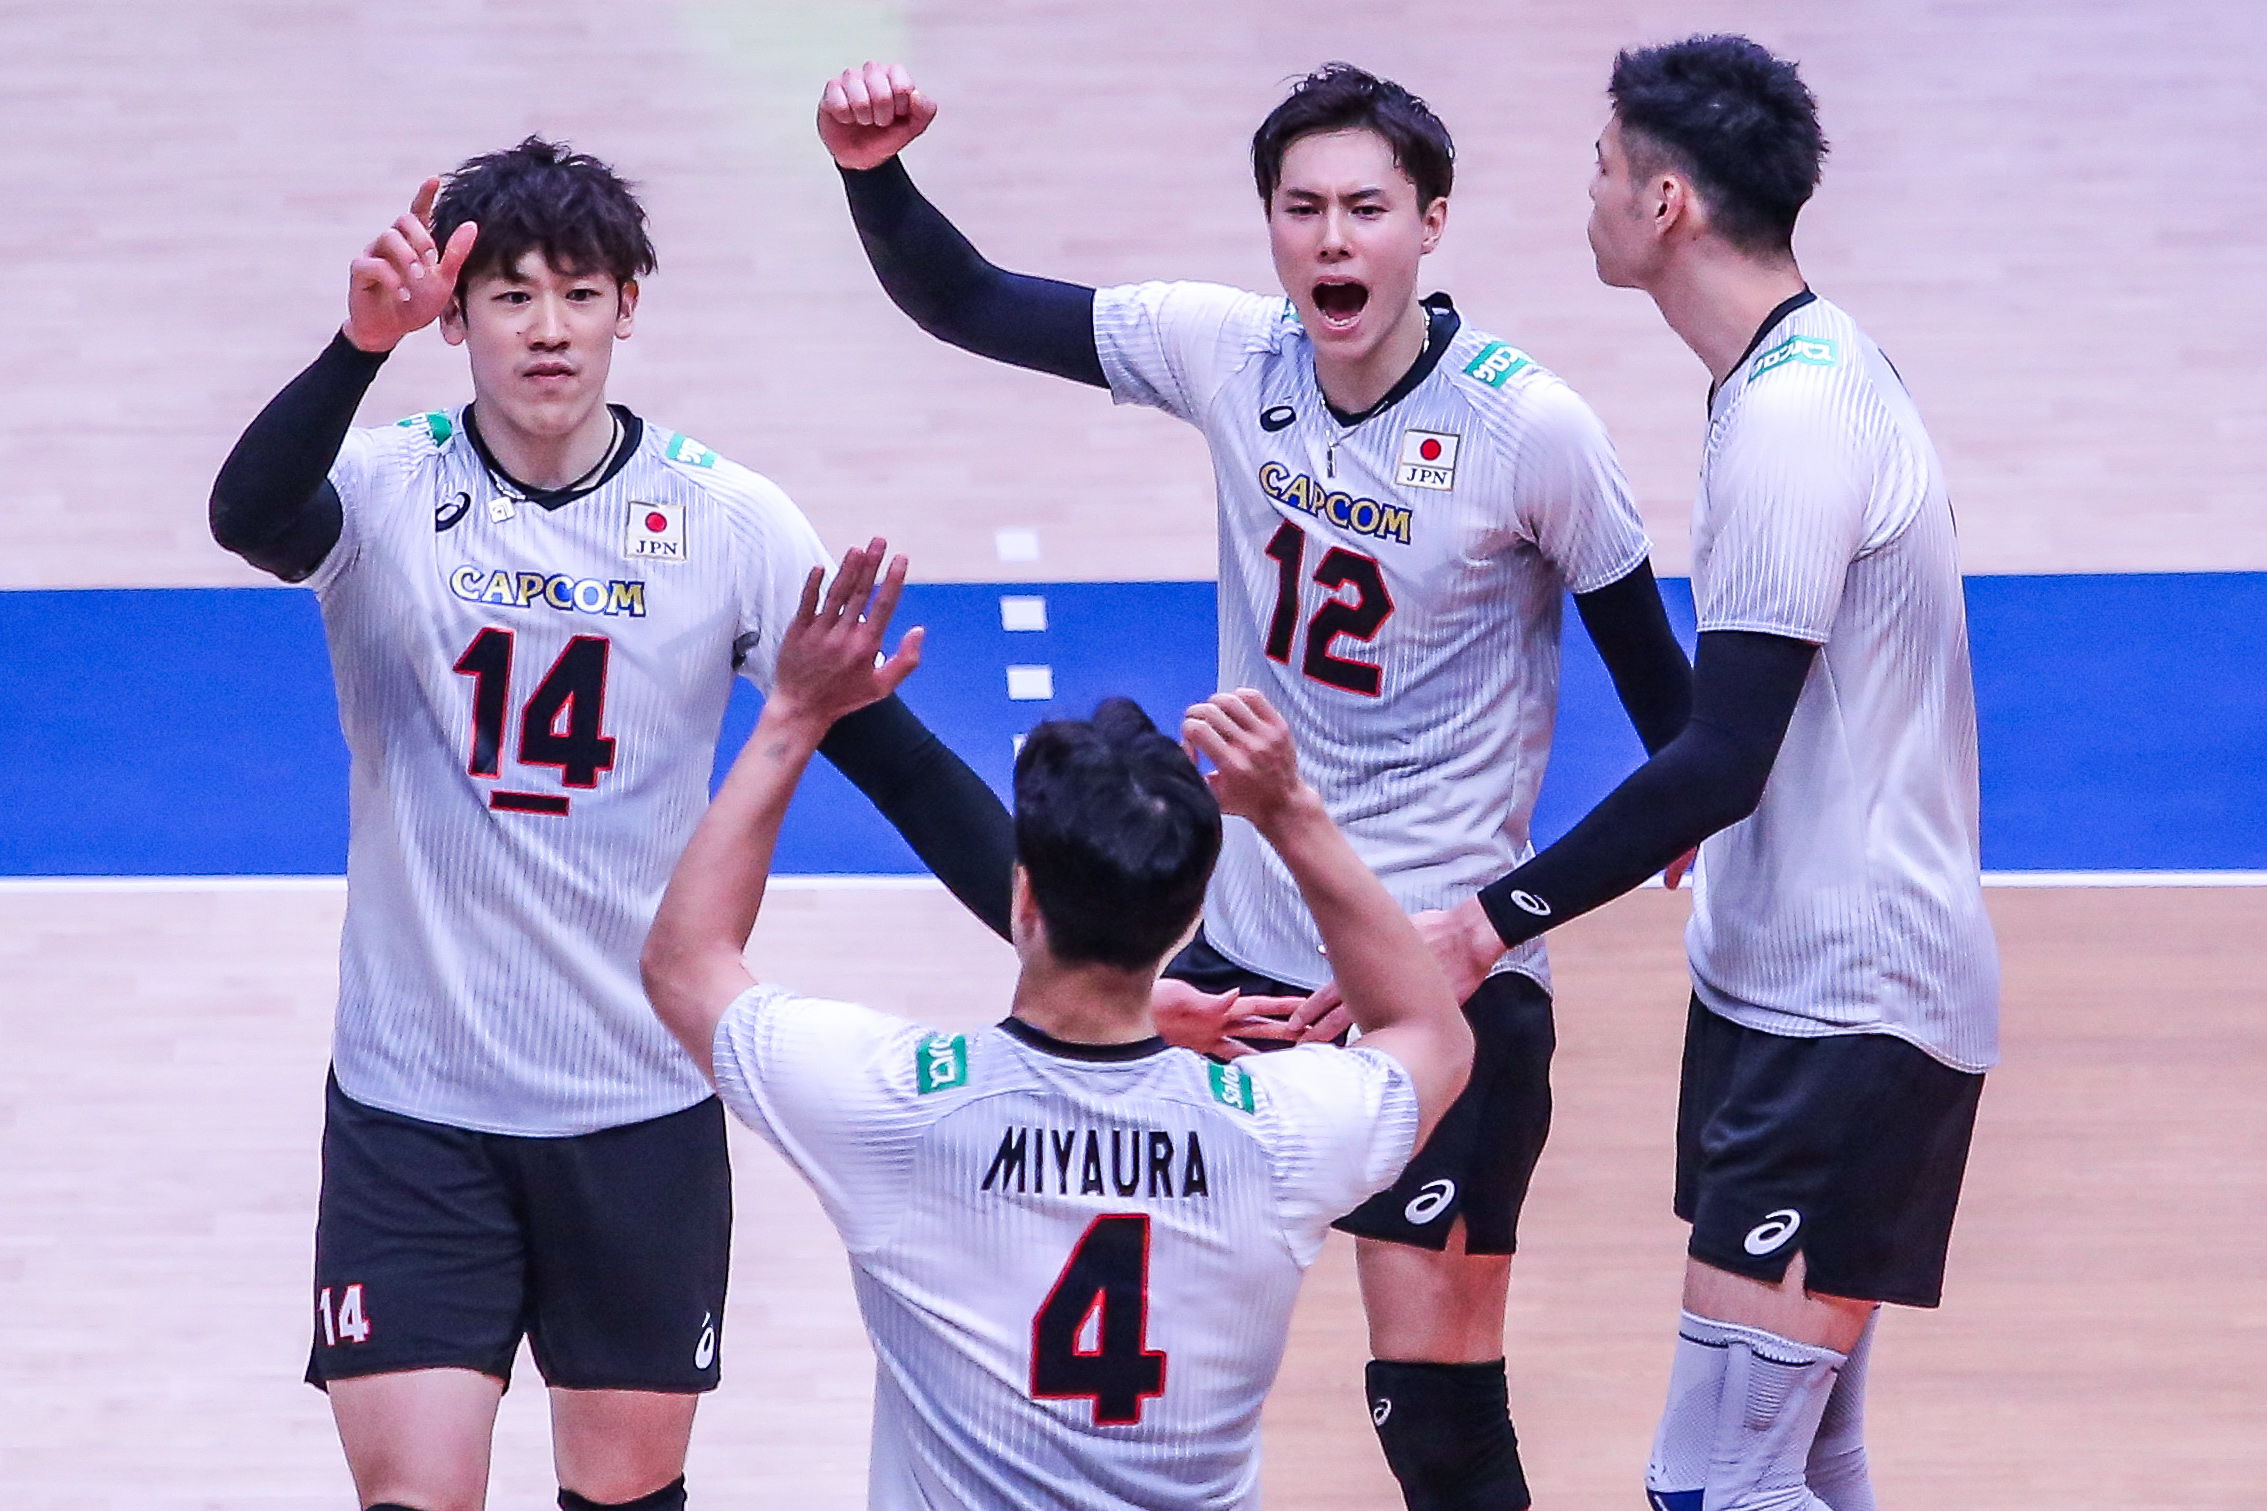 VNL Japan stays unbeaten after comefrombehind win over China